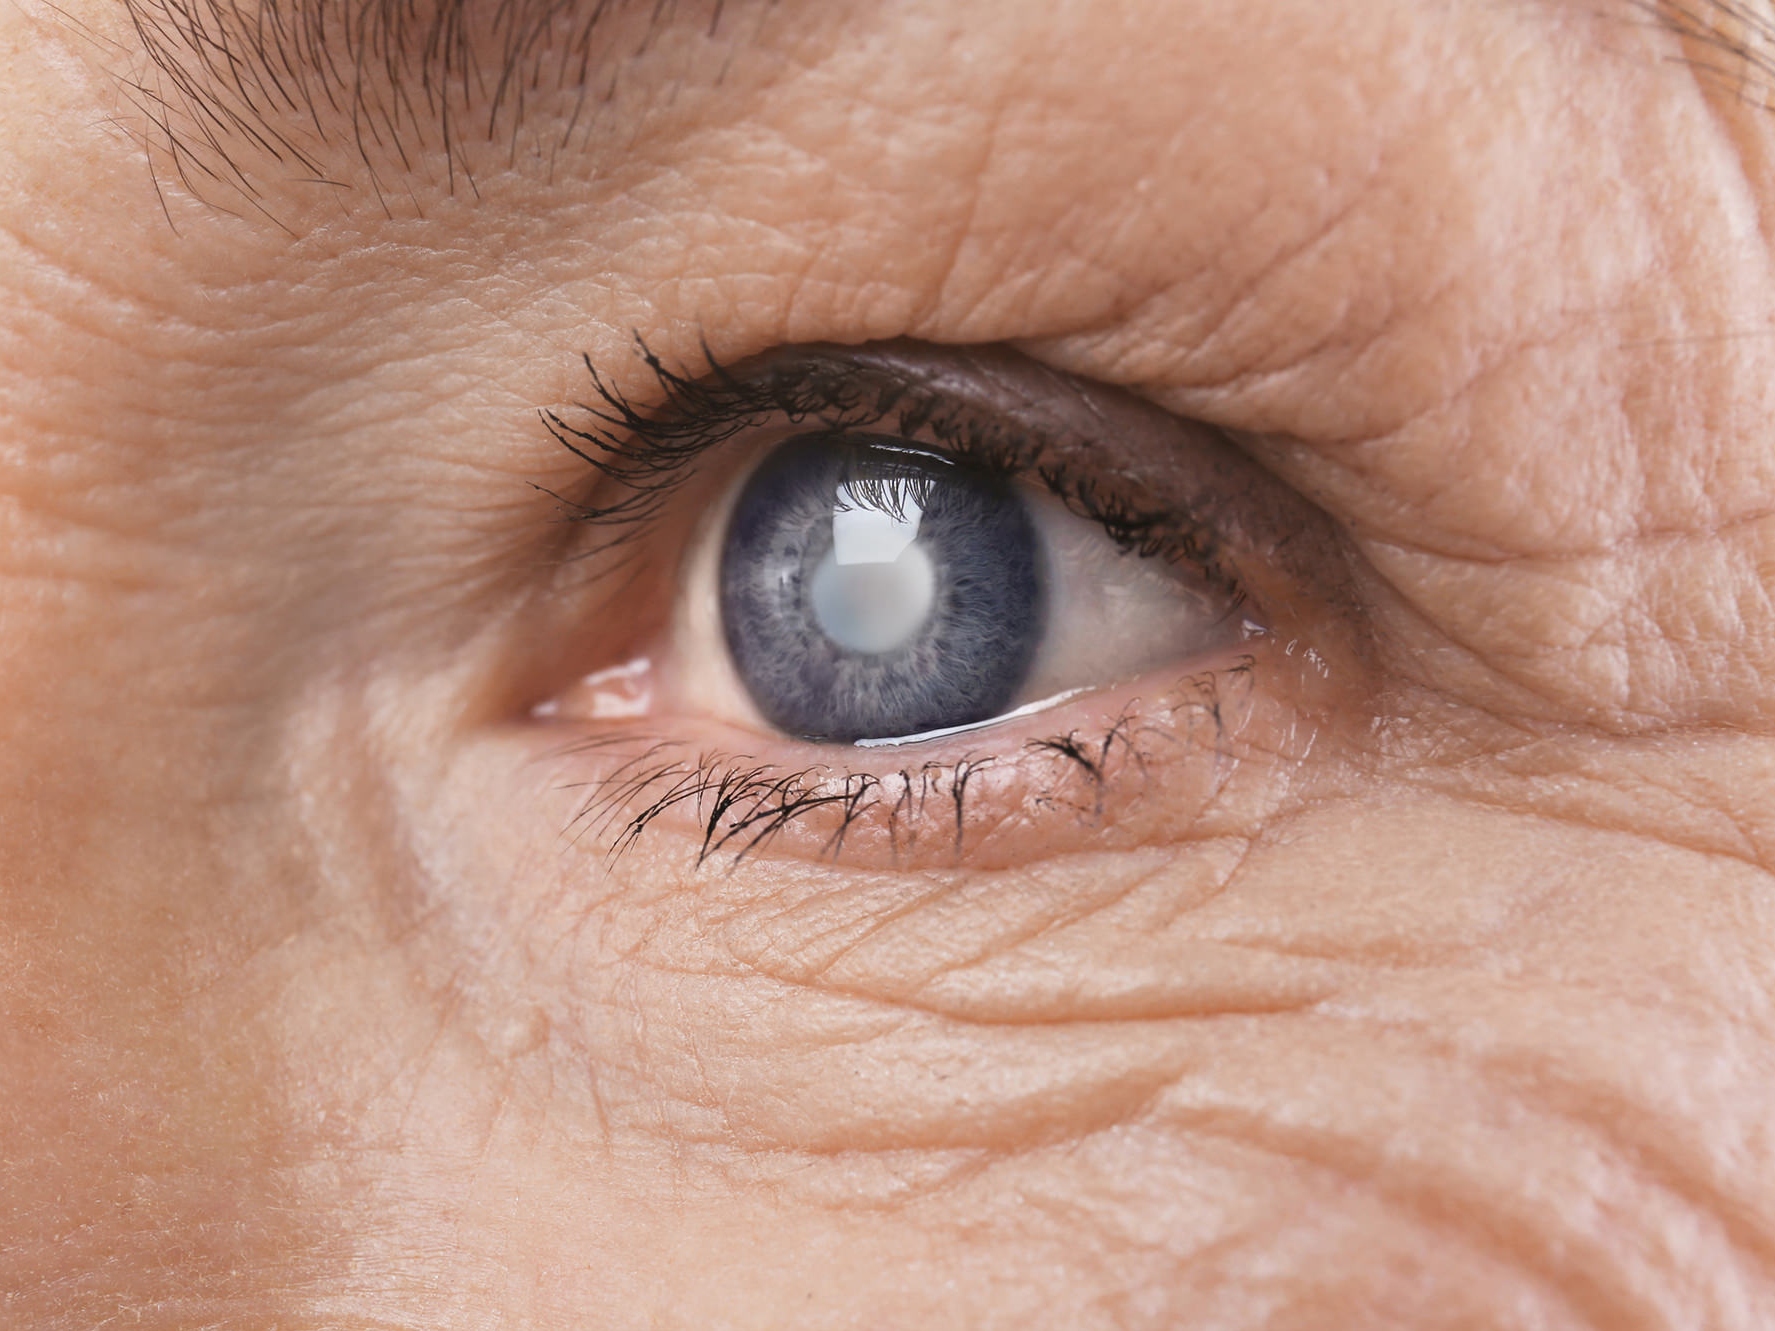 The image shows a close-up of an unhealthy eye, illustrating potential ocular adnexa hazards. 